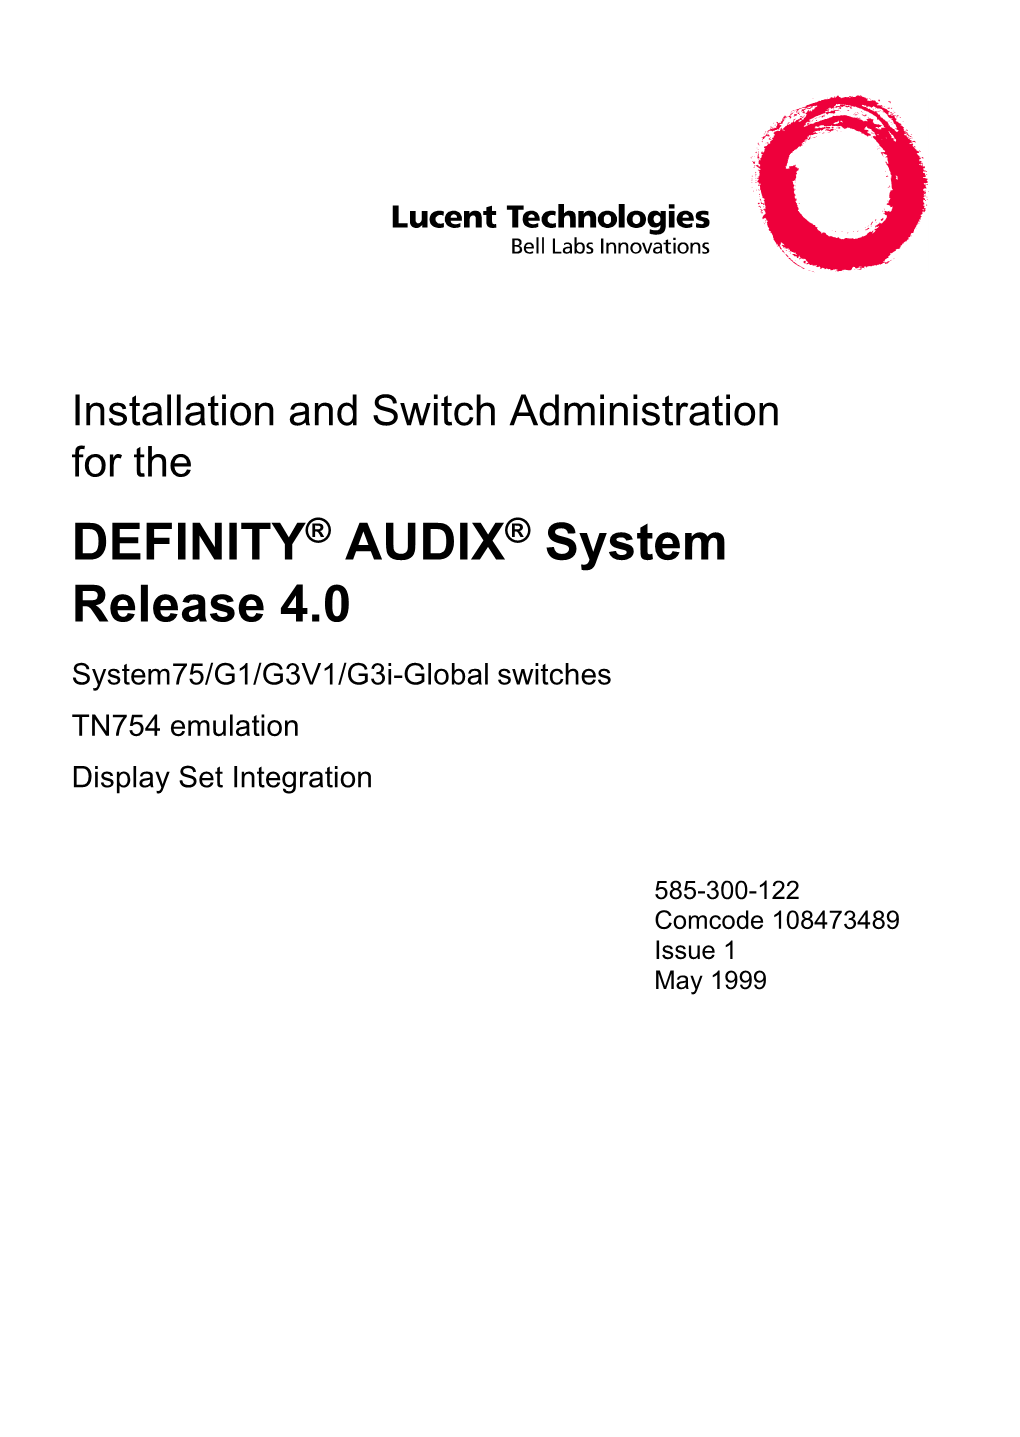 DEFINITY® AUDIX® System Release 4.0